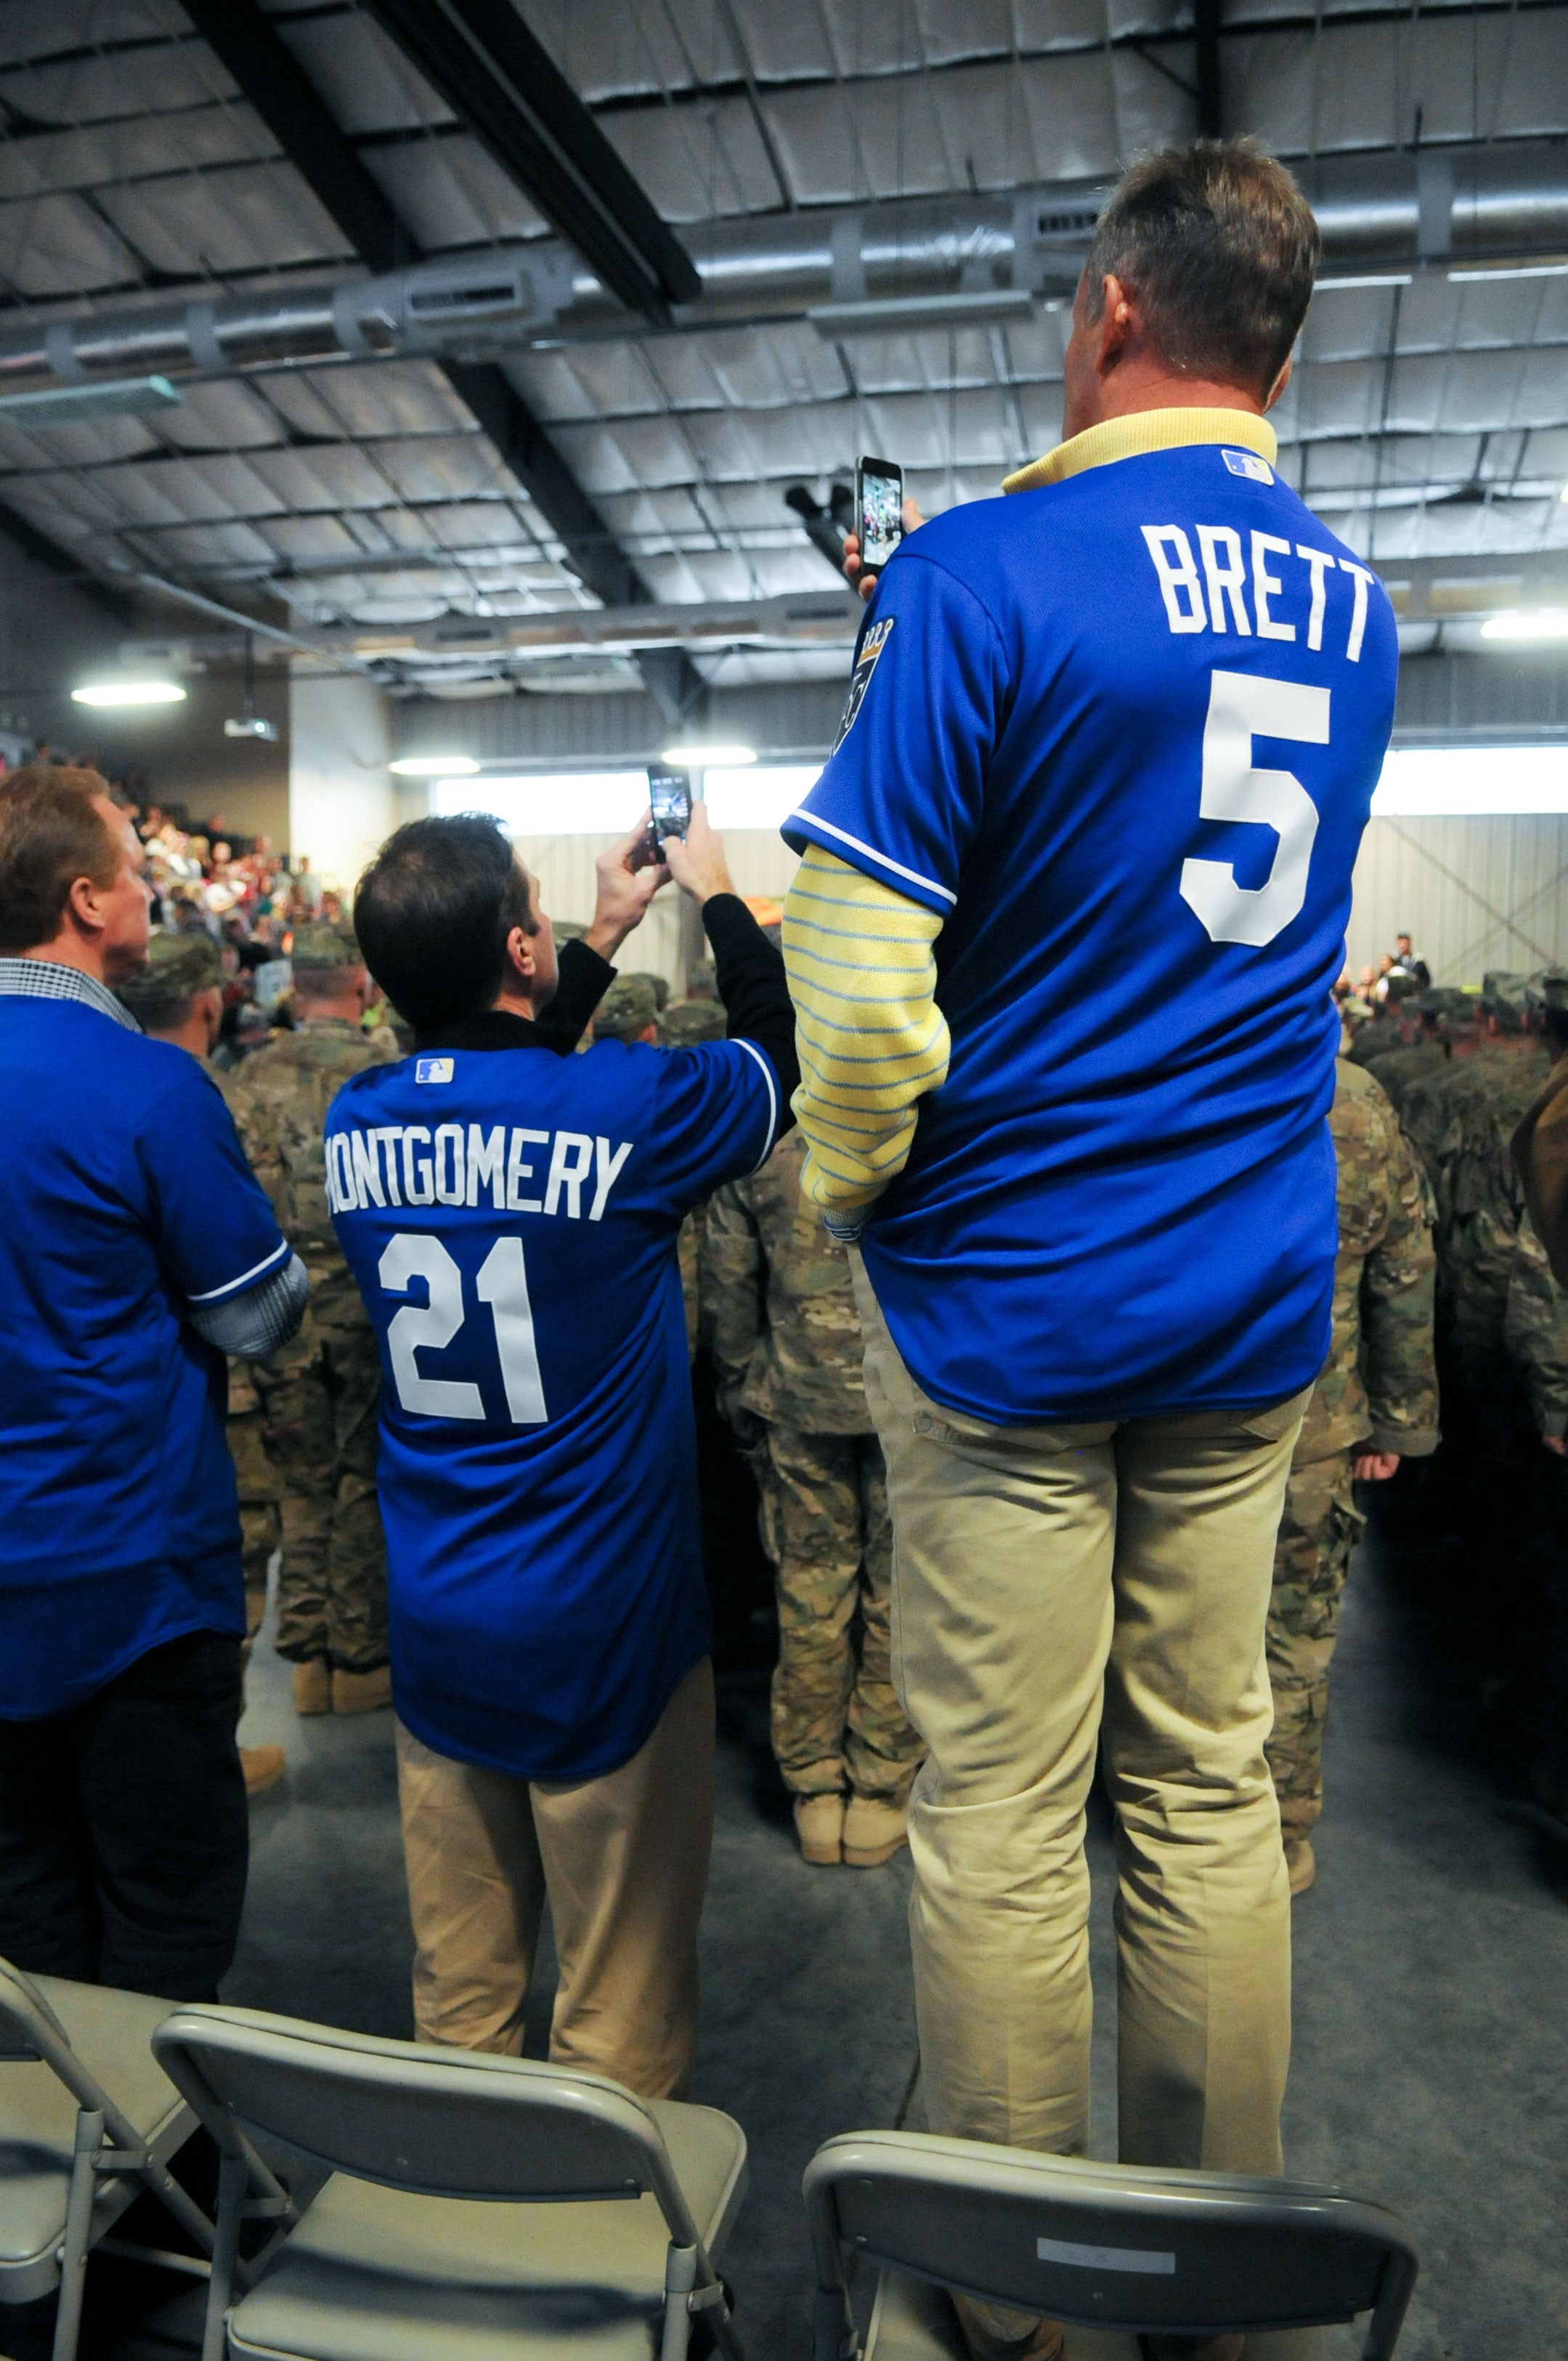 1st Infantry Division Soldiers get 'Royal' welcome, Article